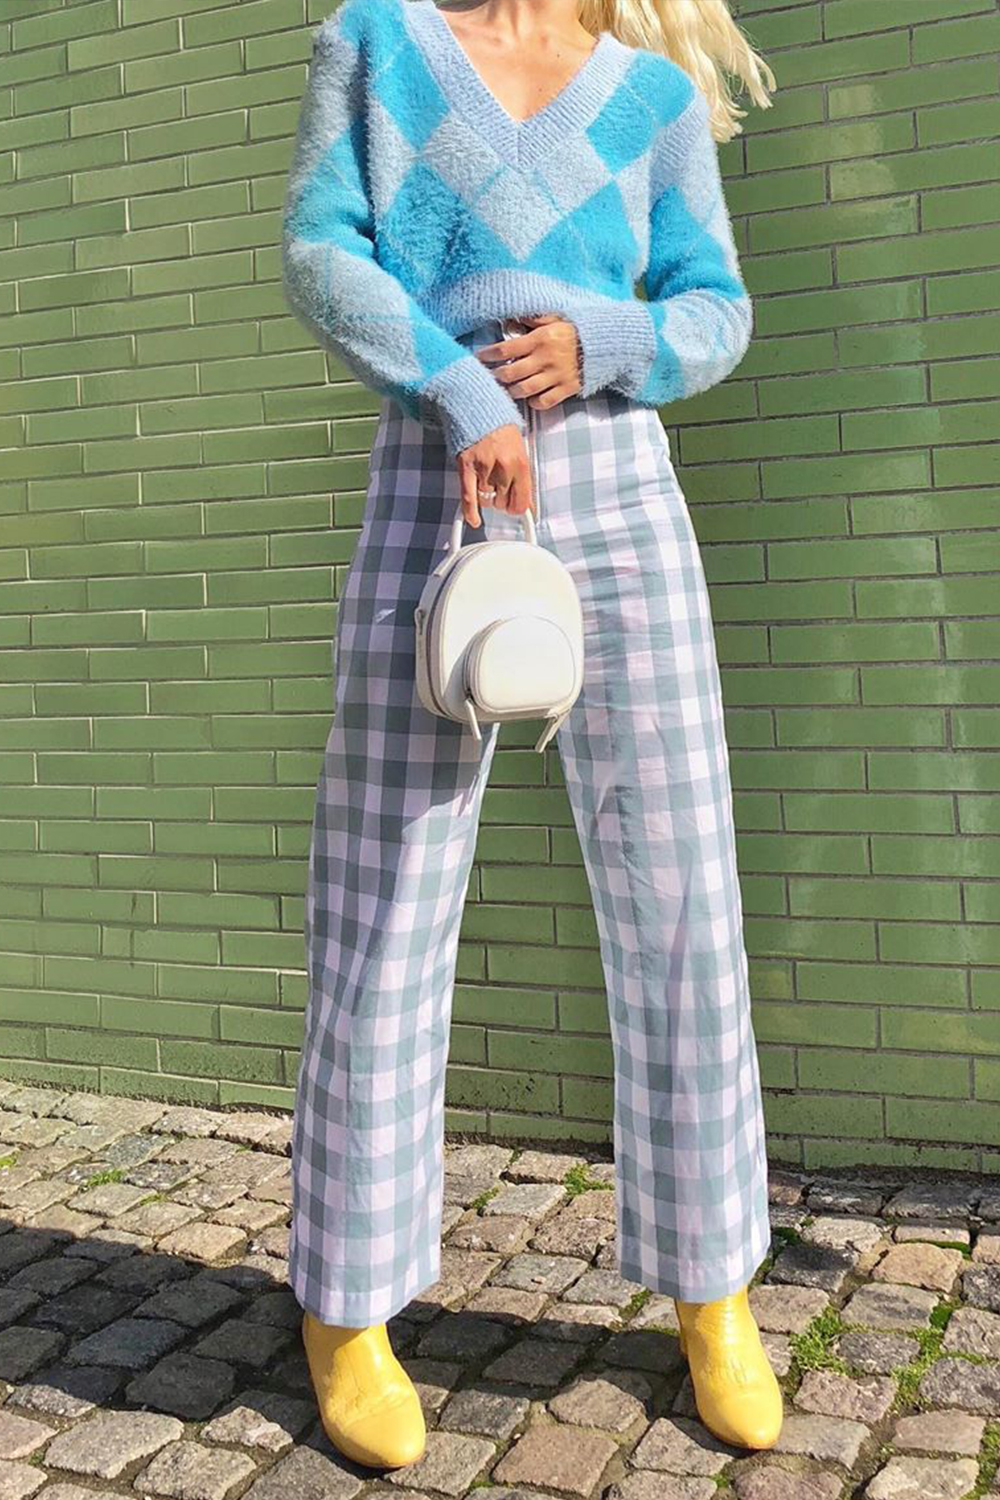 I’m a Trousers Aficionado and This Is the Trend I’m Loving for 2021